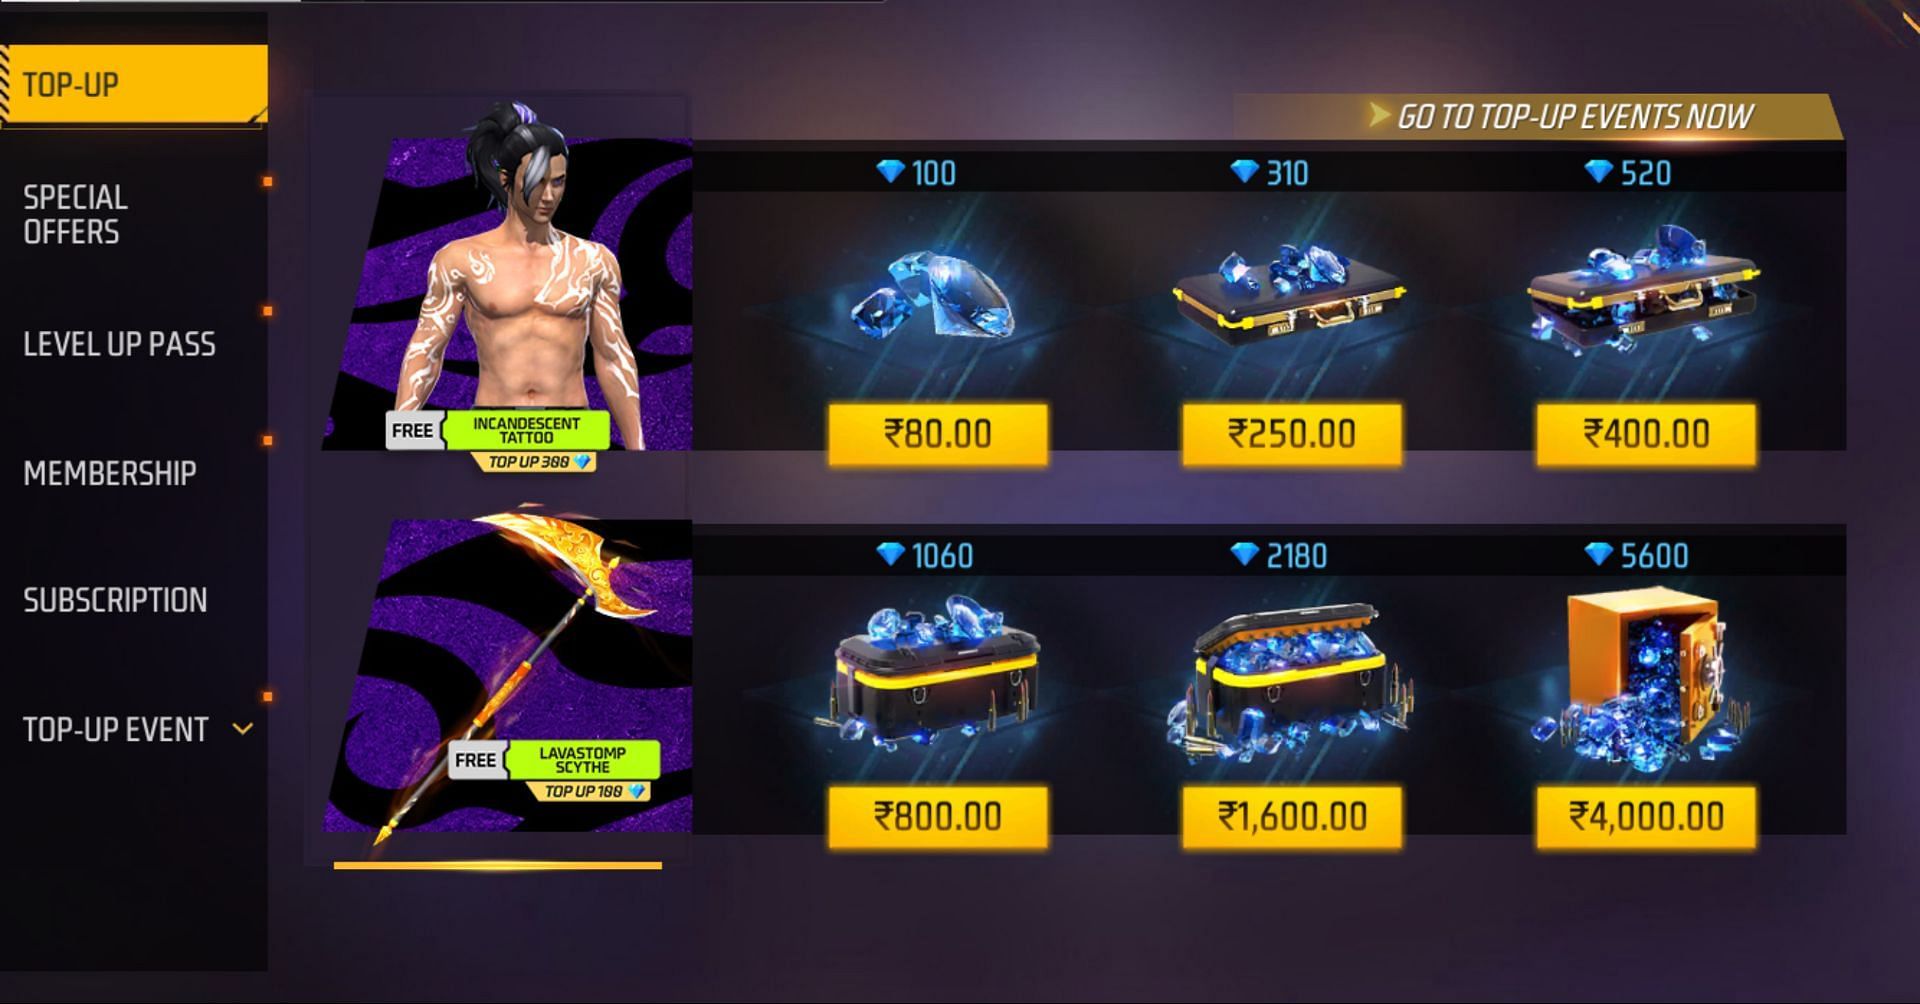 There are several top-up options available to you in the in-game center (Image via Garena)